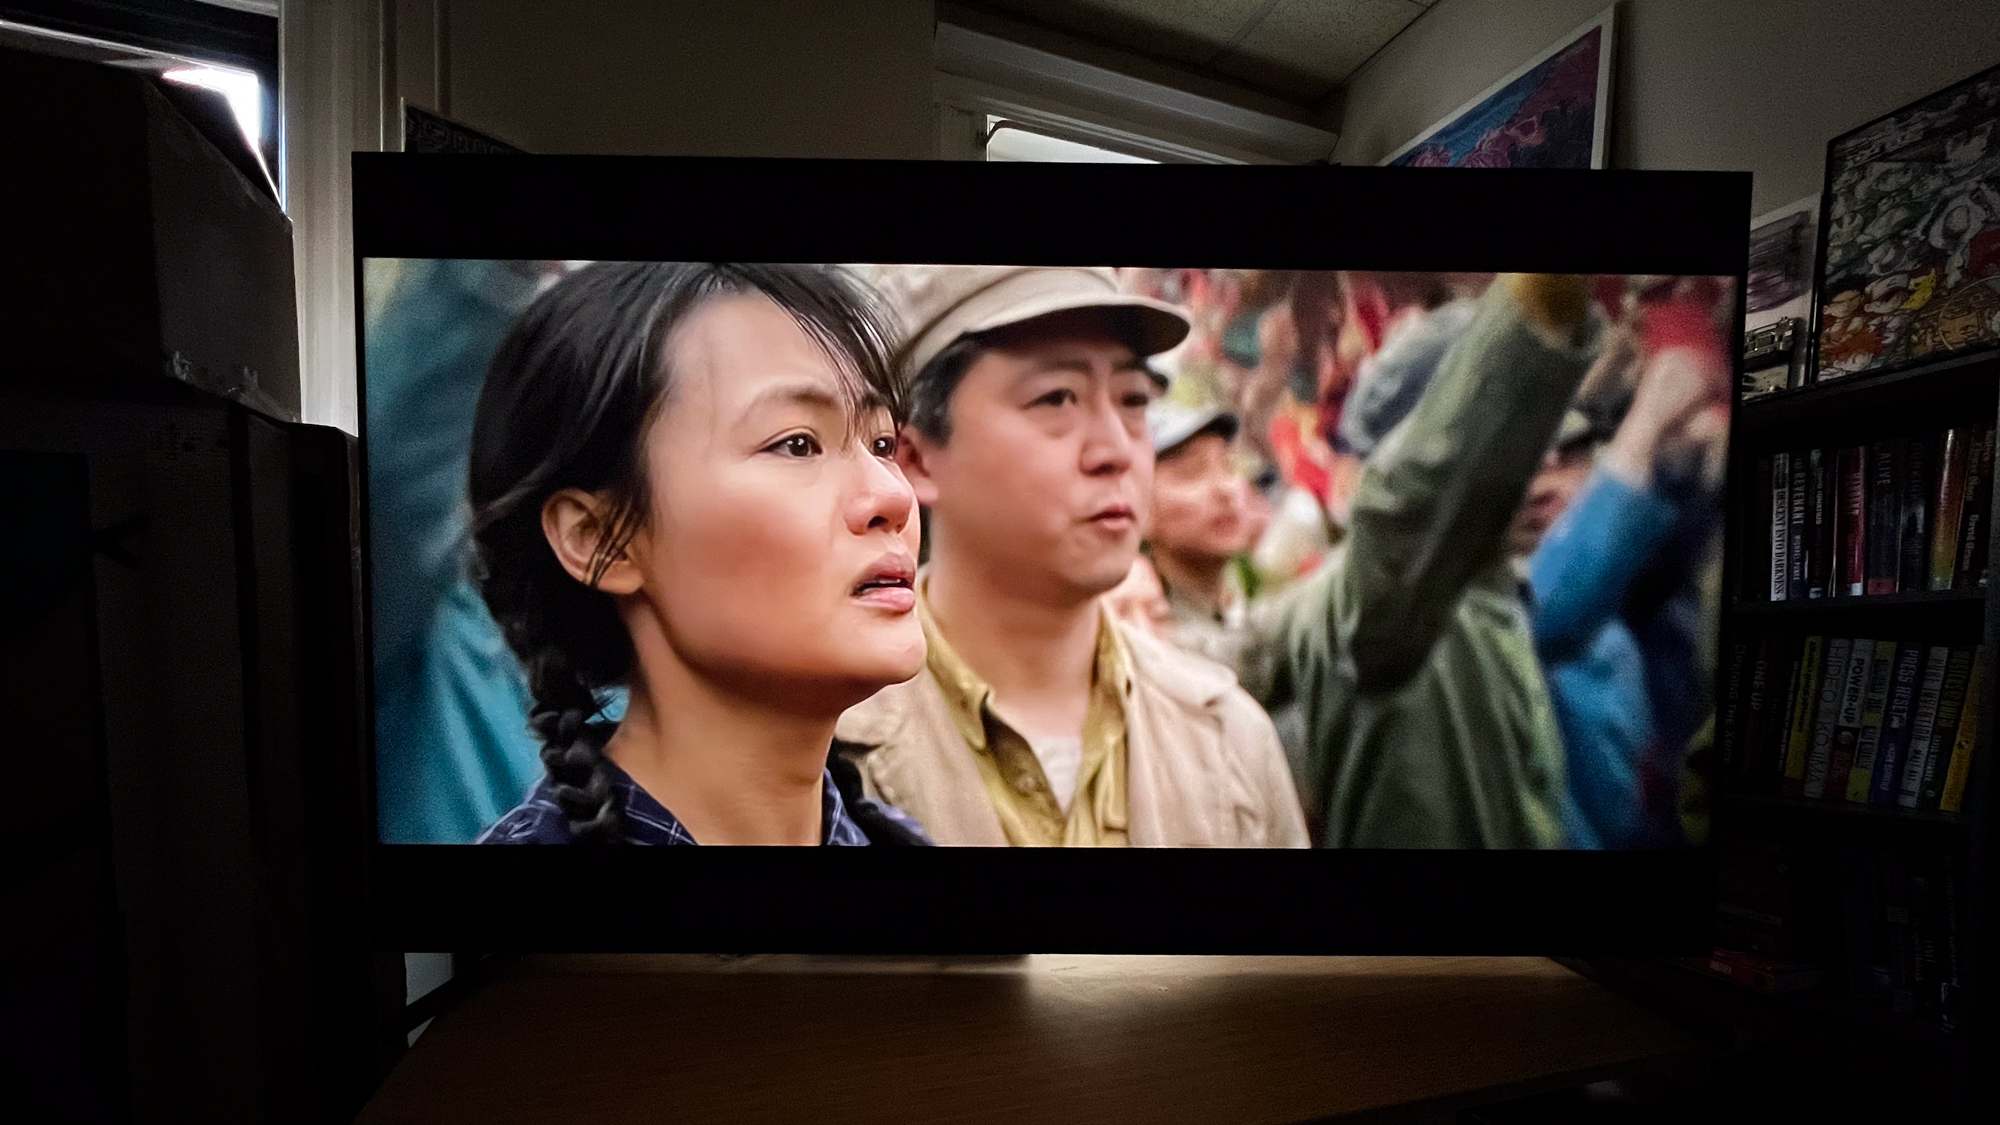 The Sony XR X90L showing Netflix's 